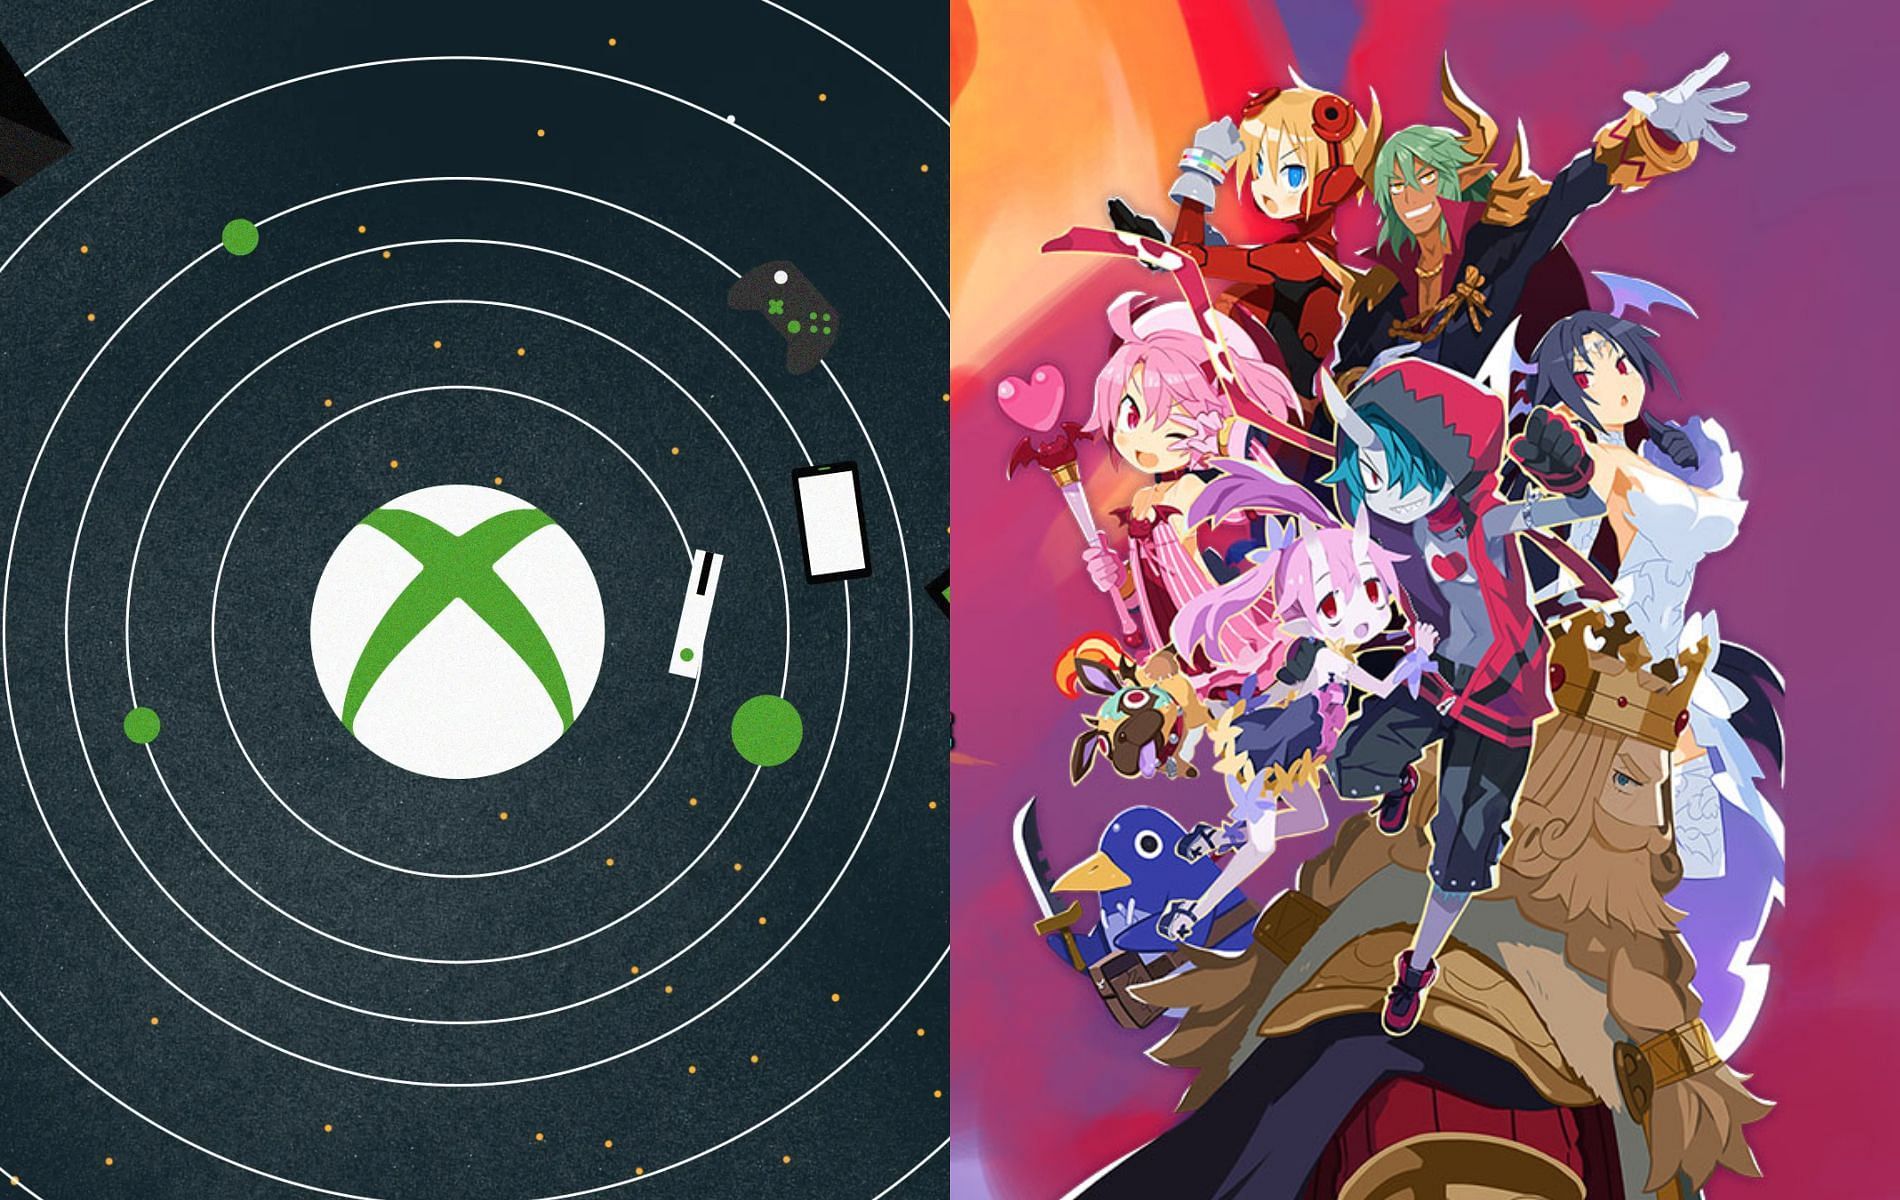 It seems like Xbox fans are in for another surprise (Images via Microsoft/NIS America)